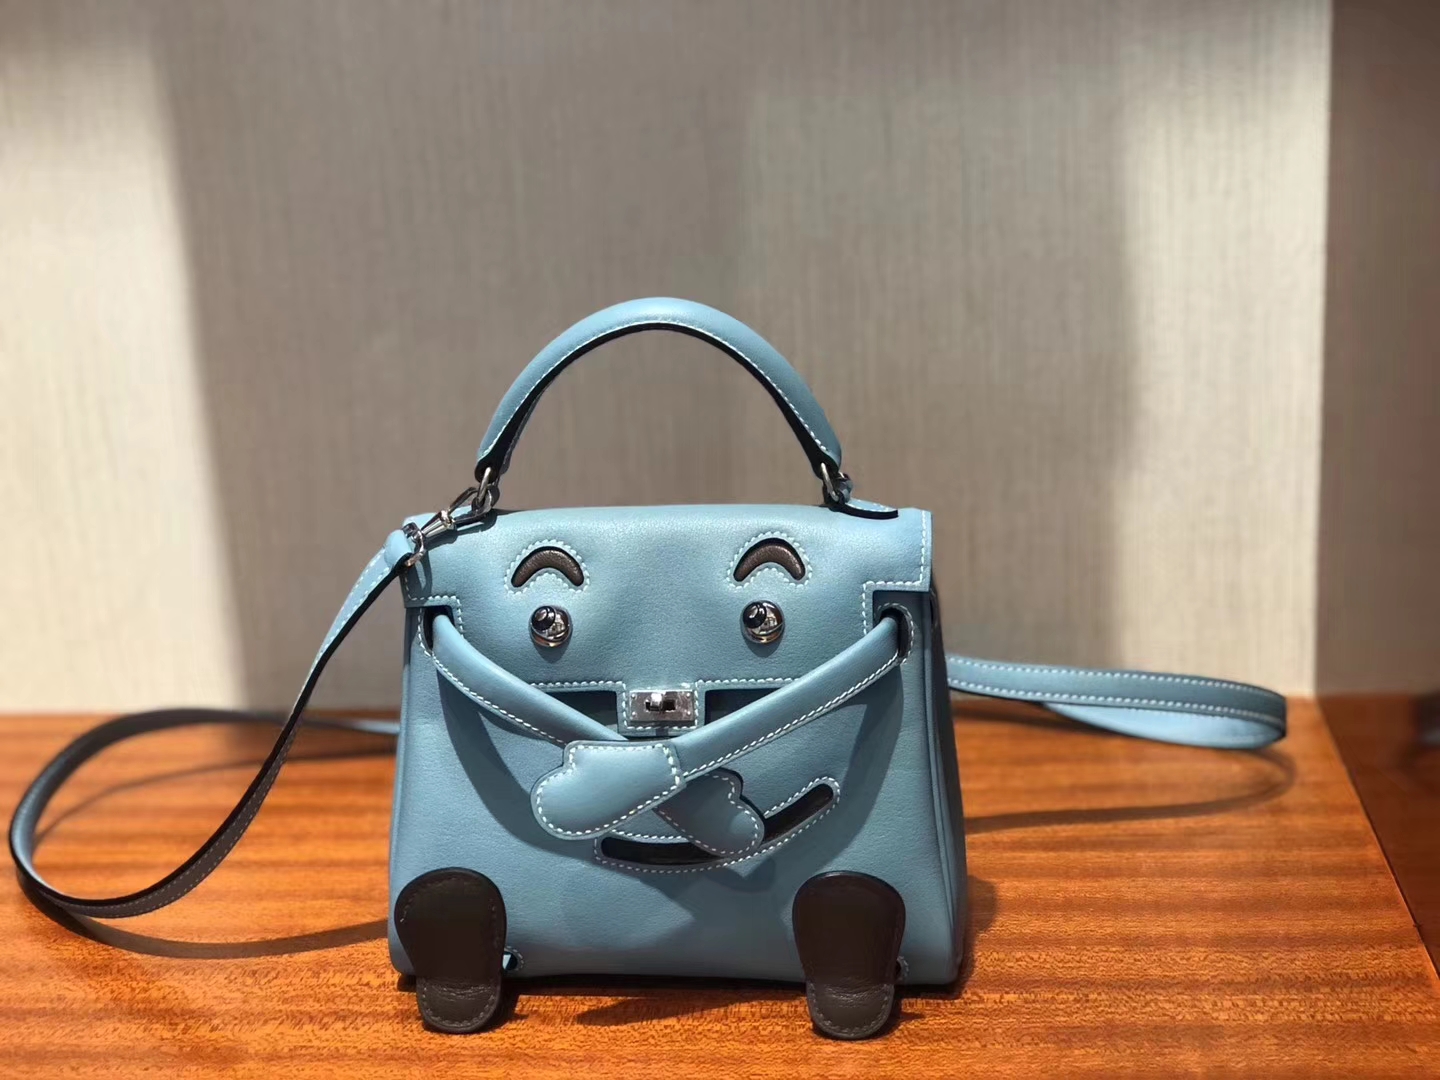 Lovely Hermes Calf Leather Kell Doll Tote Bag in Blue Jean Silver Hardware